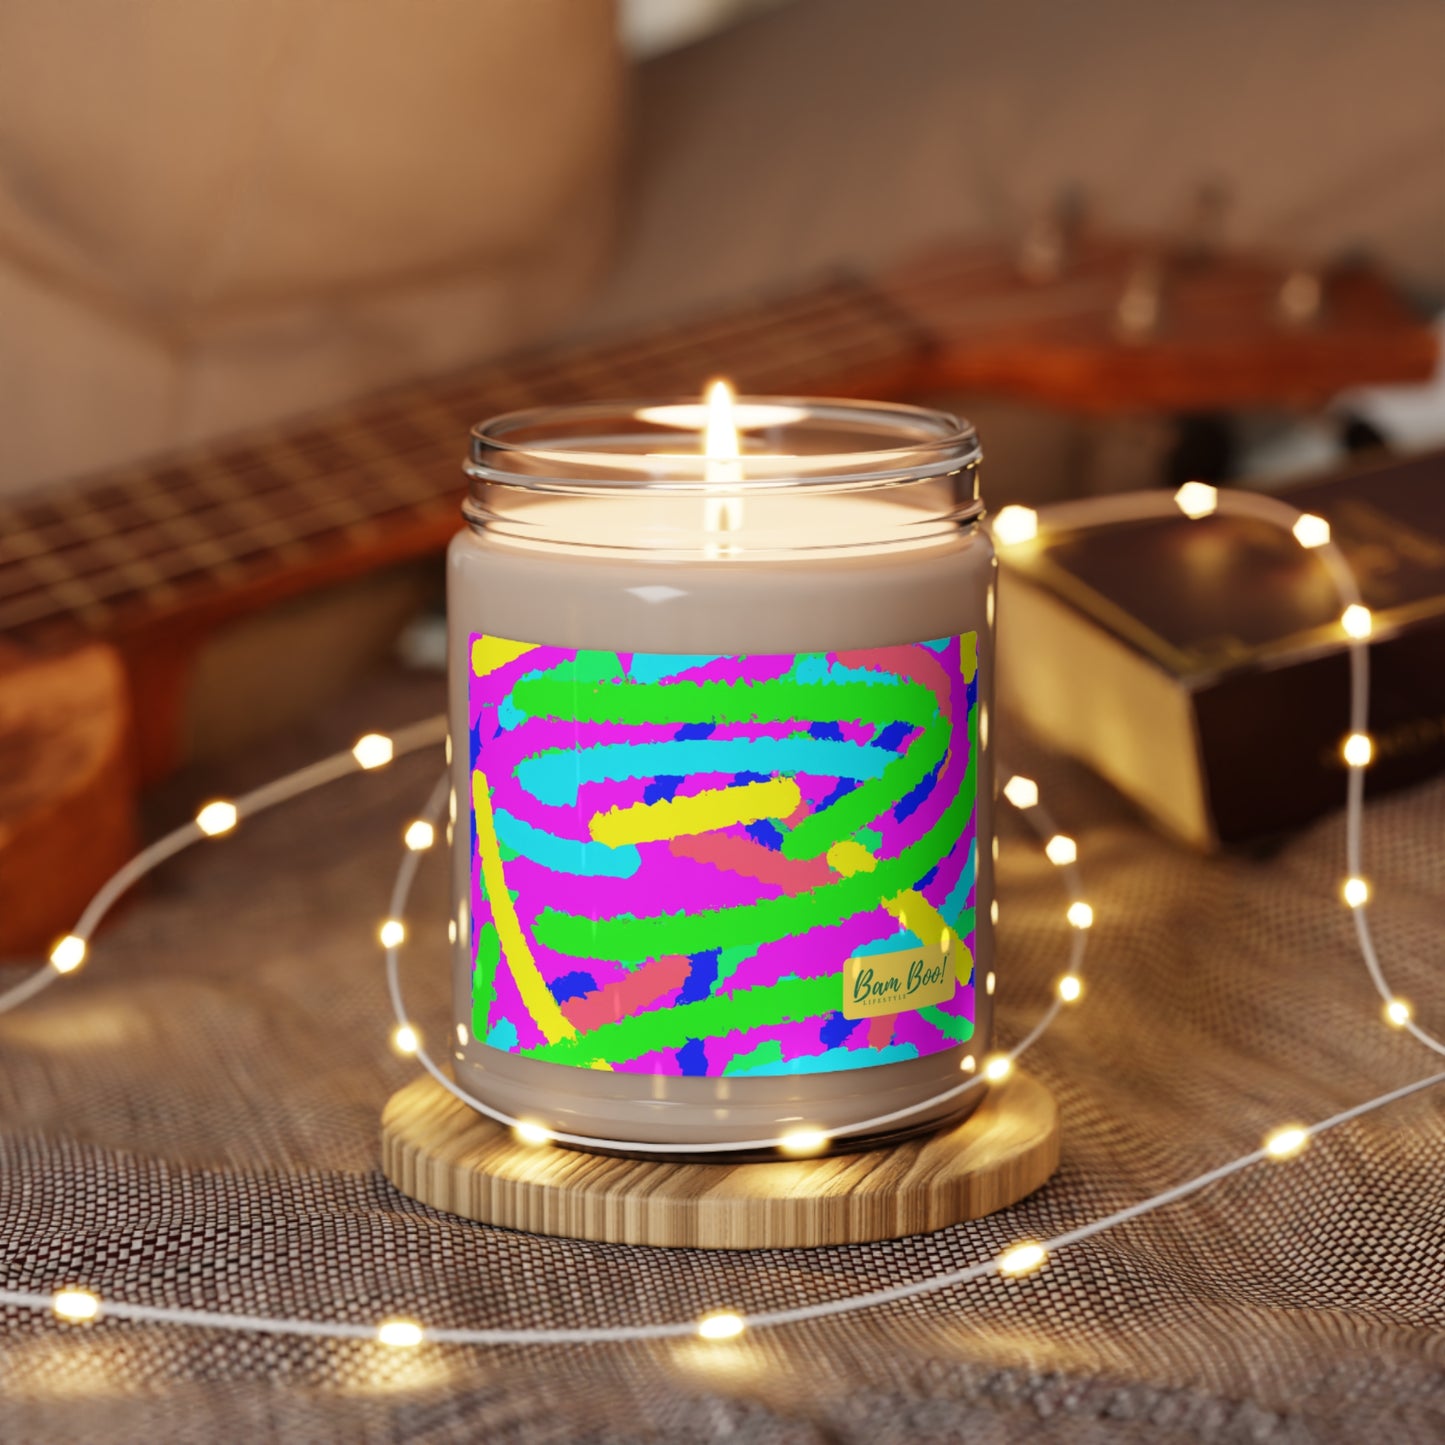 "Radiant Resonance: Exploring Color Through Emotion" - Bam Boo! Lifestyle Eco-friendly Soy Candle